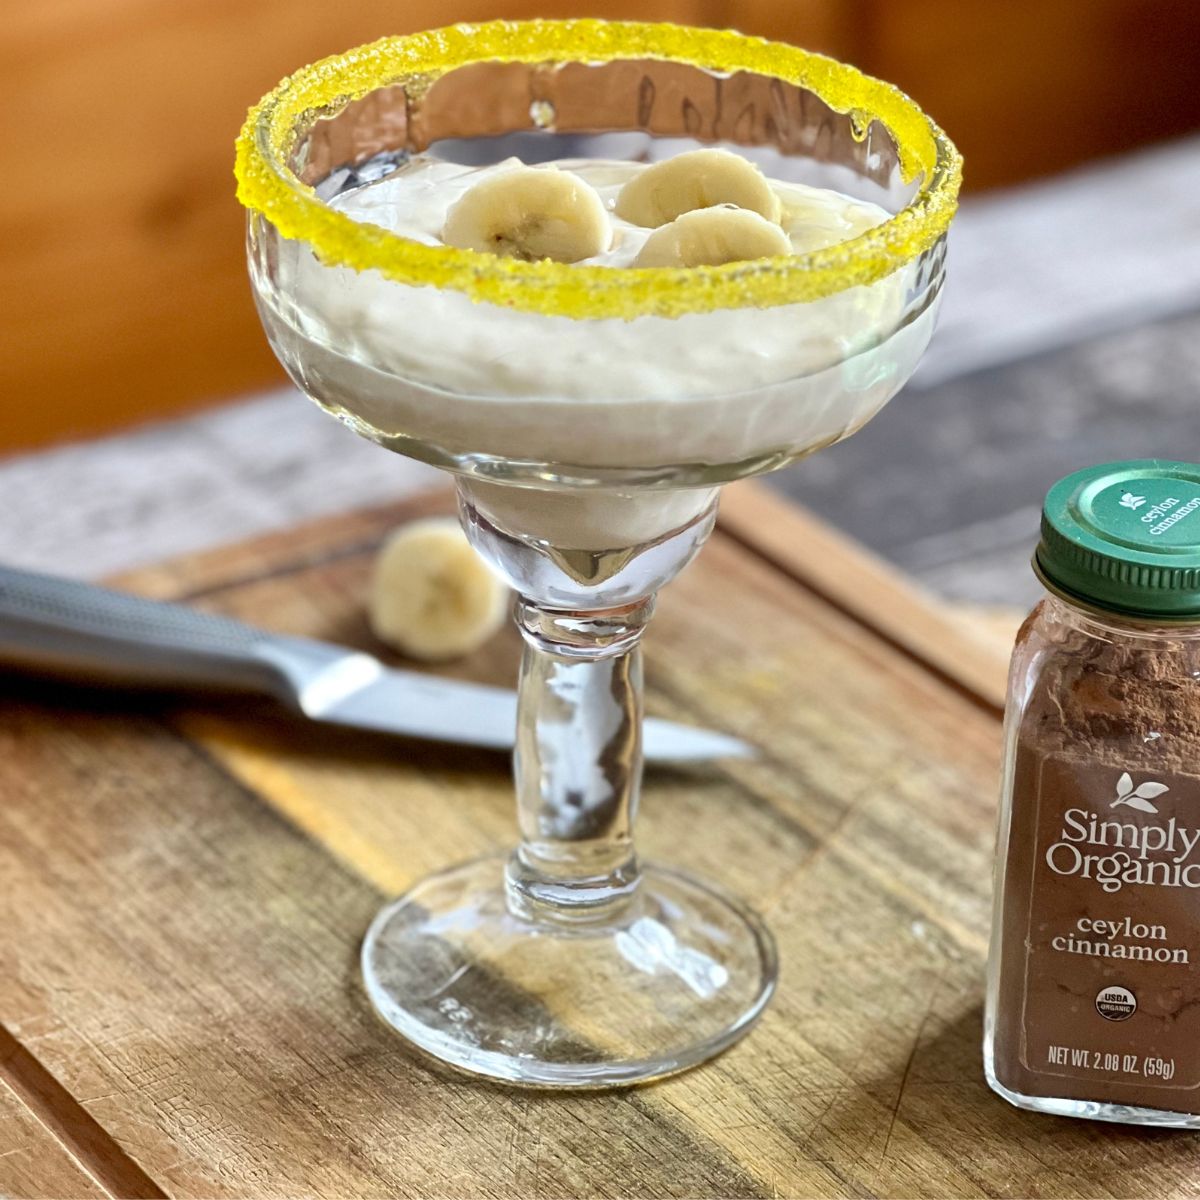 WW Banana Protein Pudding in a glass on a wooden cutting board